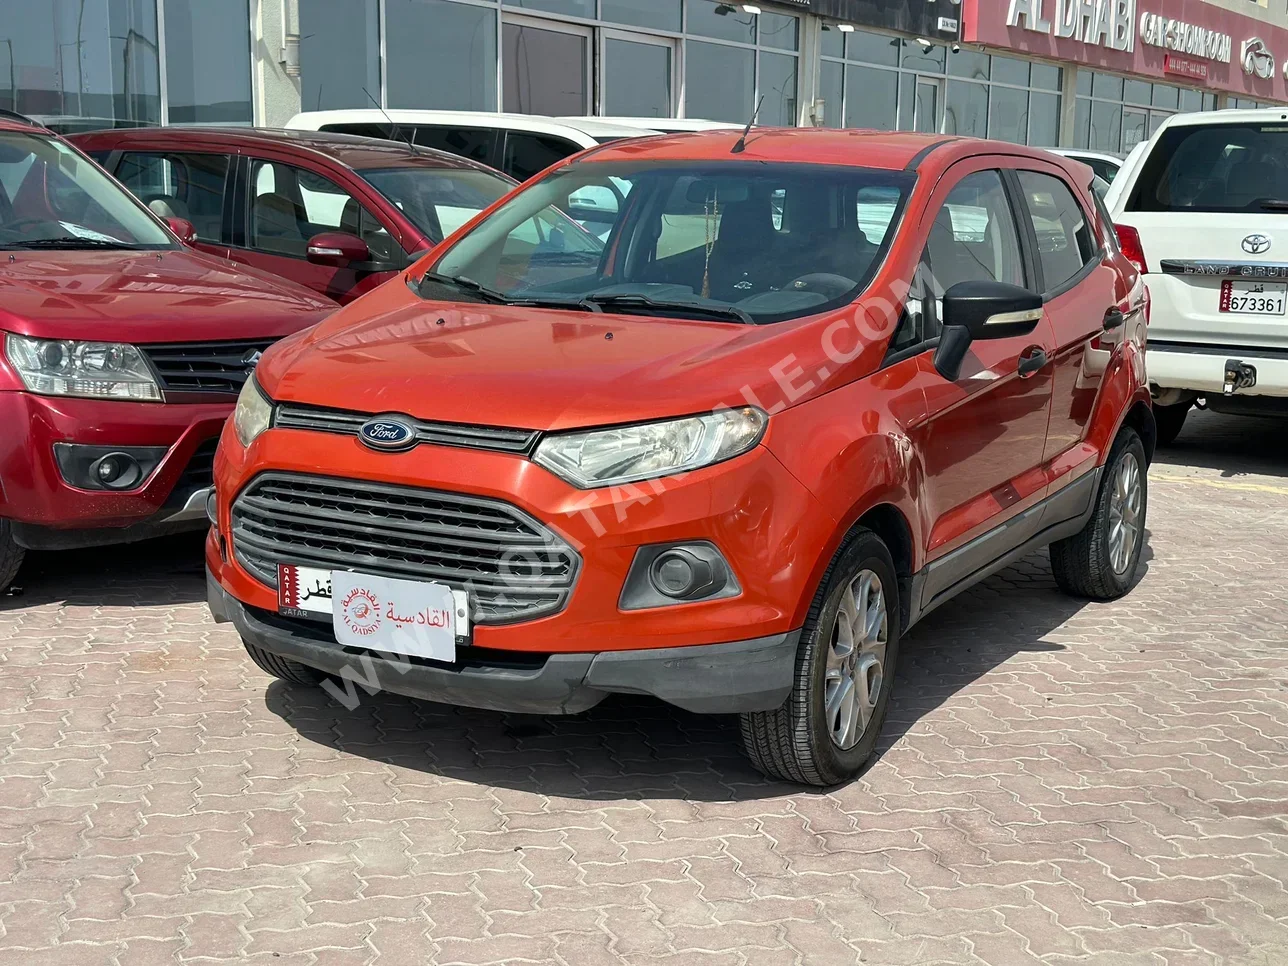 Ford  Eco Sport  2016  Automatic  238,000 Km  4 Cylinder  Front Wheel Drive (FWD)  SUV  Orange